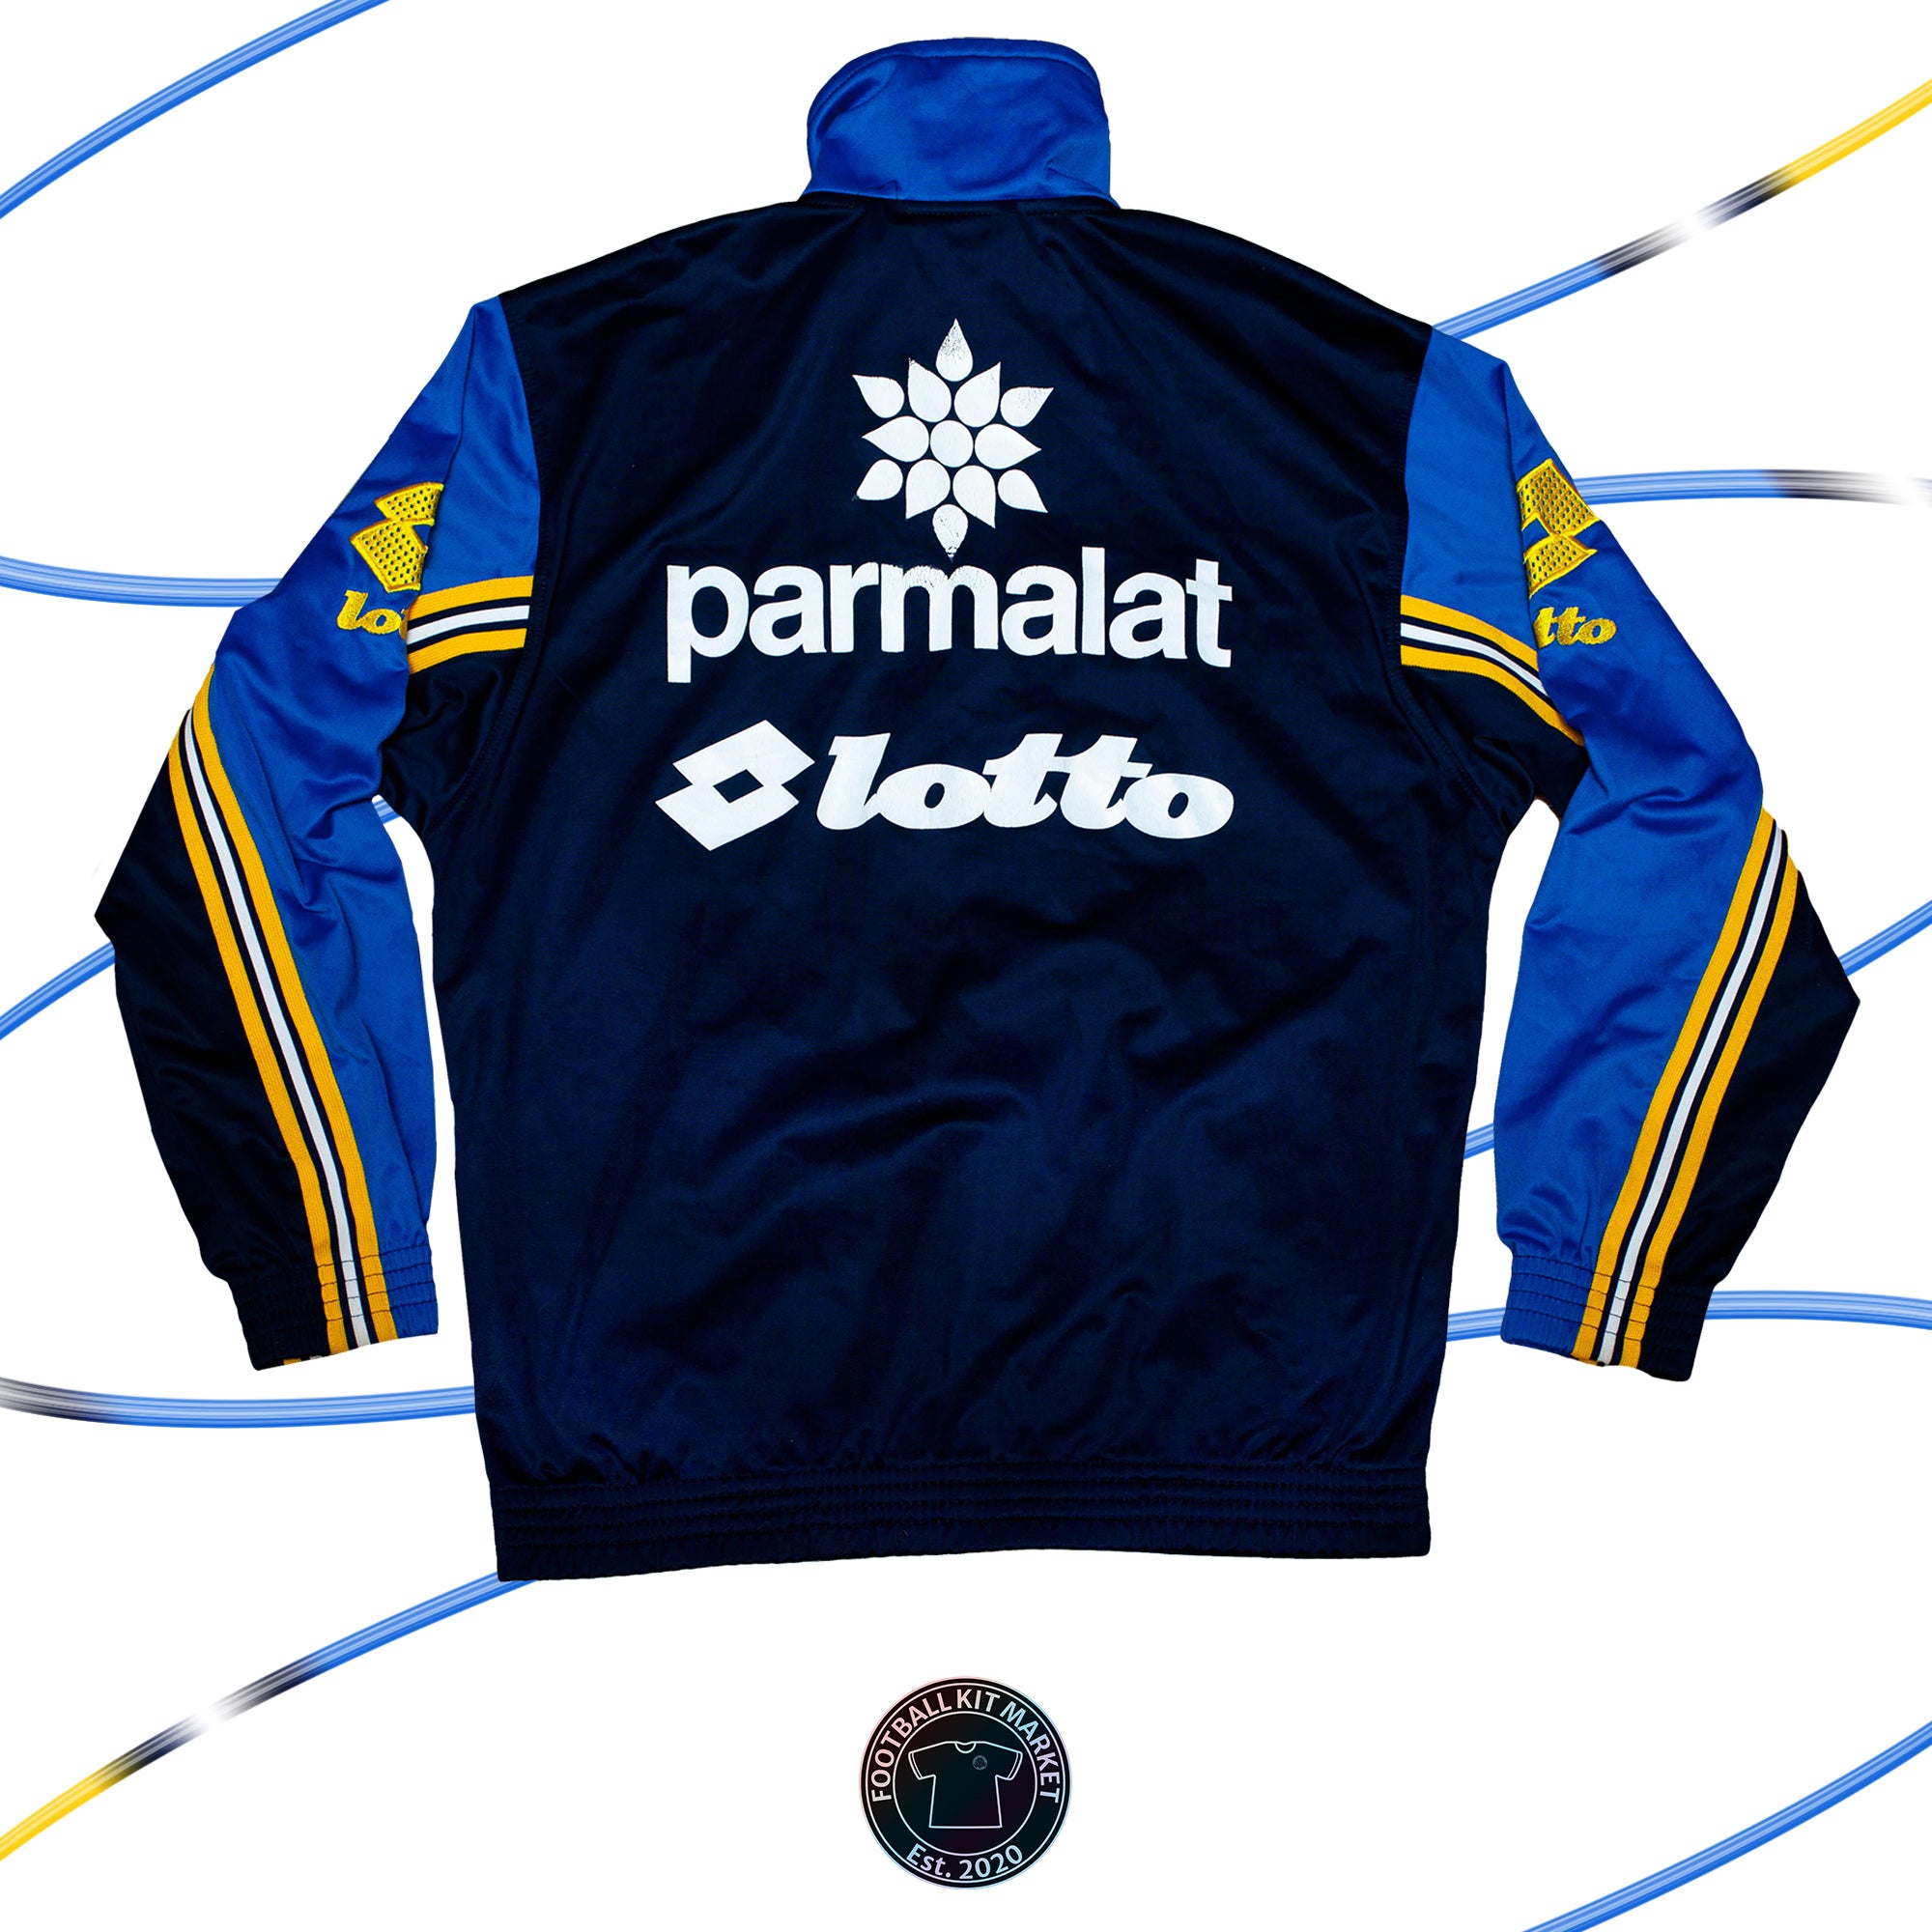 Genuine PARMA Jacket (1998-1999) - LOTTO (L) - Product Image from Football Kit Market